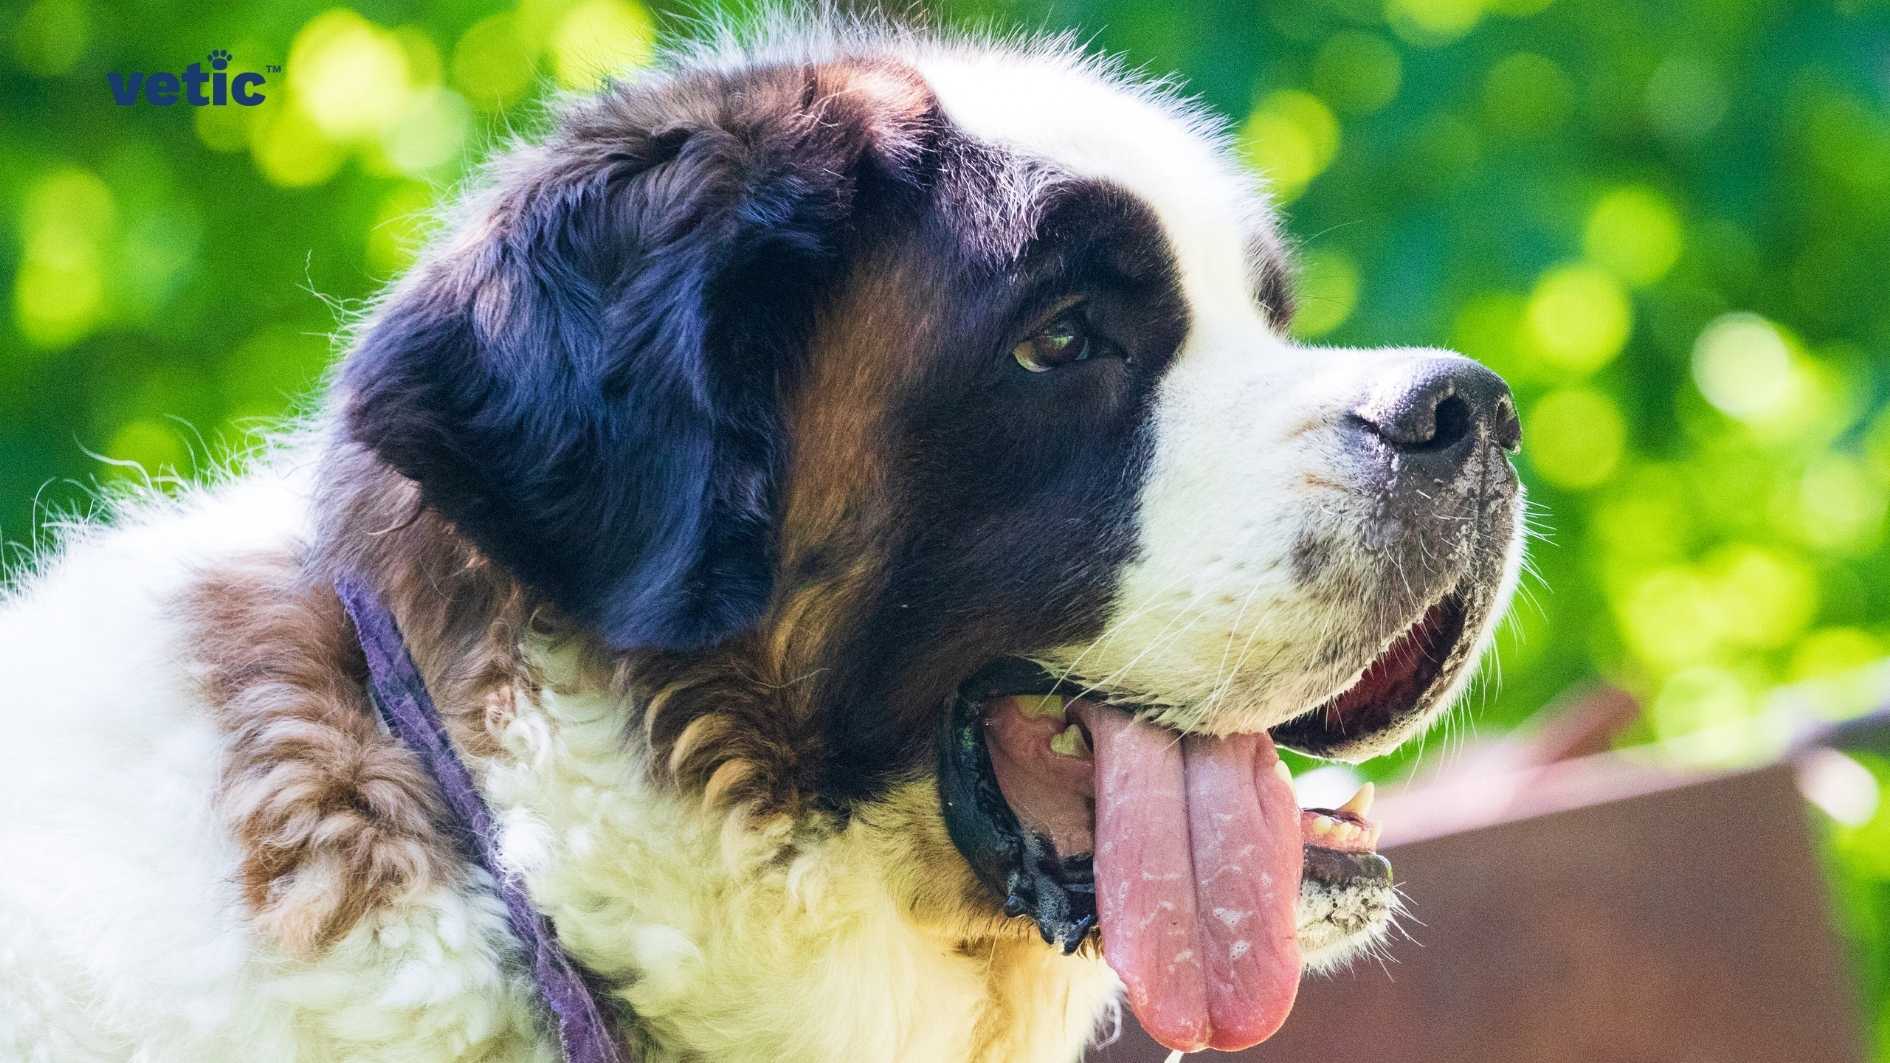 A close-up image of a Saint Bernard dog with its tongue out, showcasing a mix of white and brown fur, set against a backdrop of greenery with the text ‘vetic’ in the top left corner.